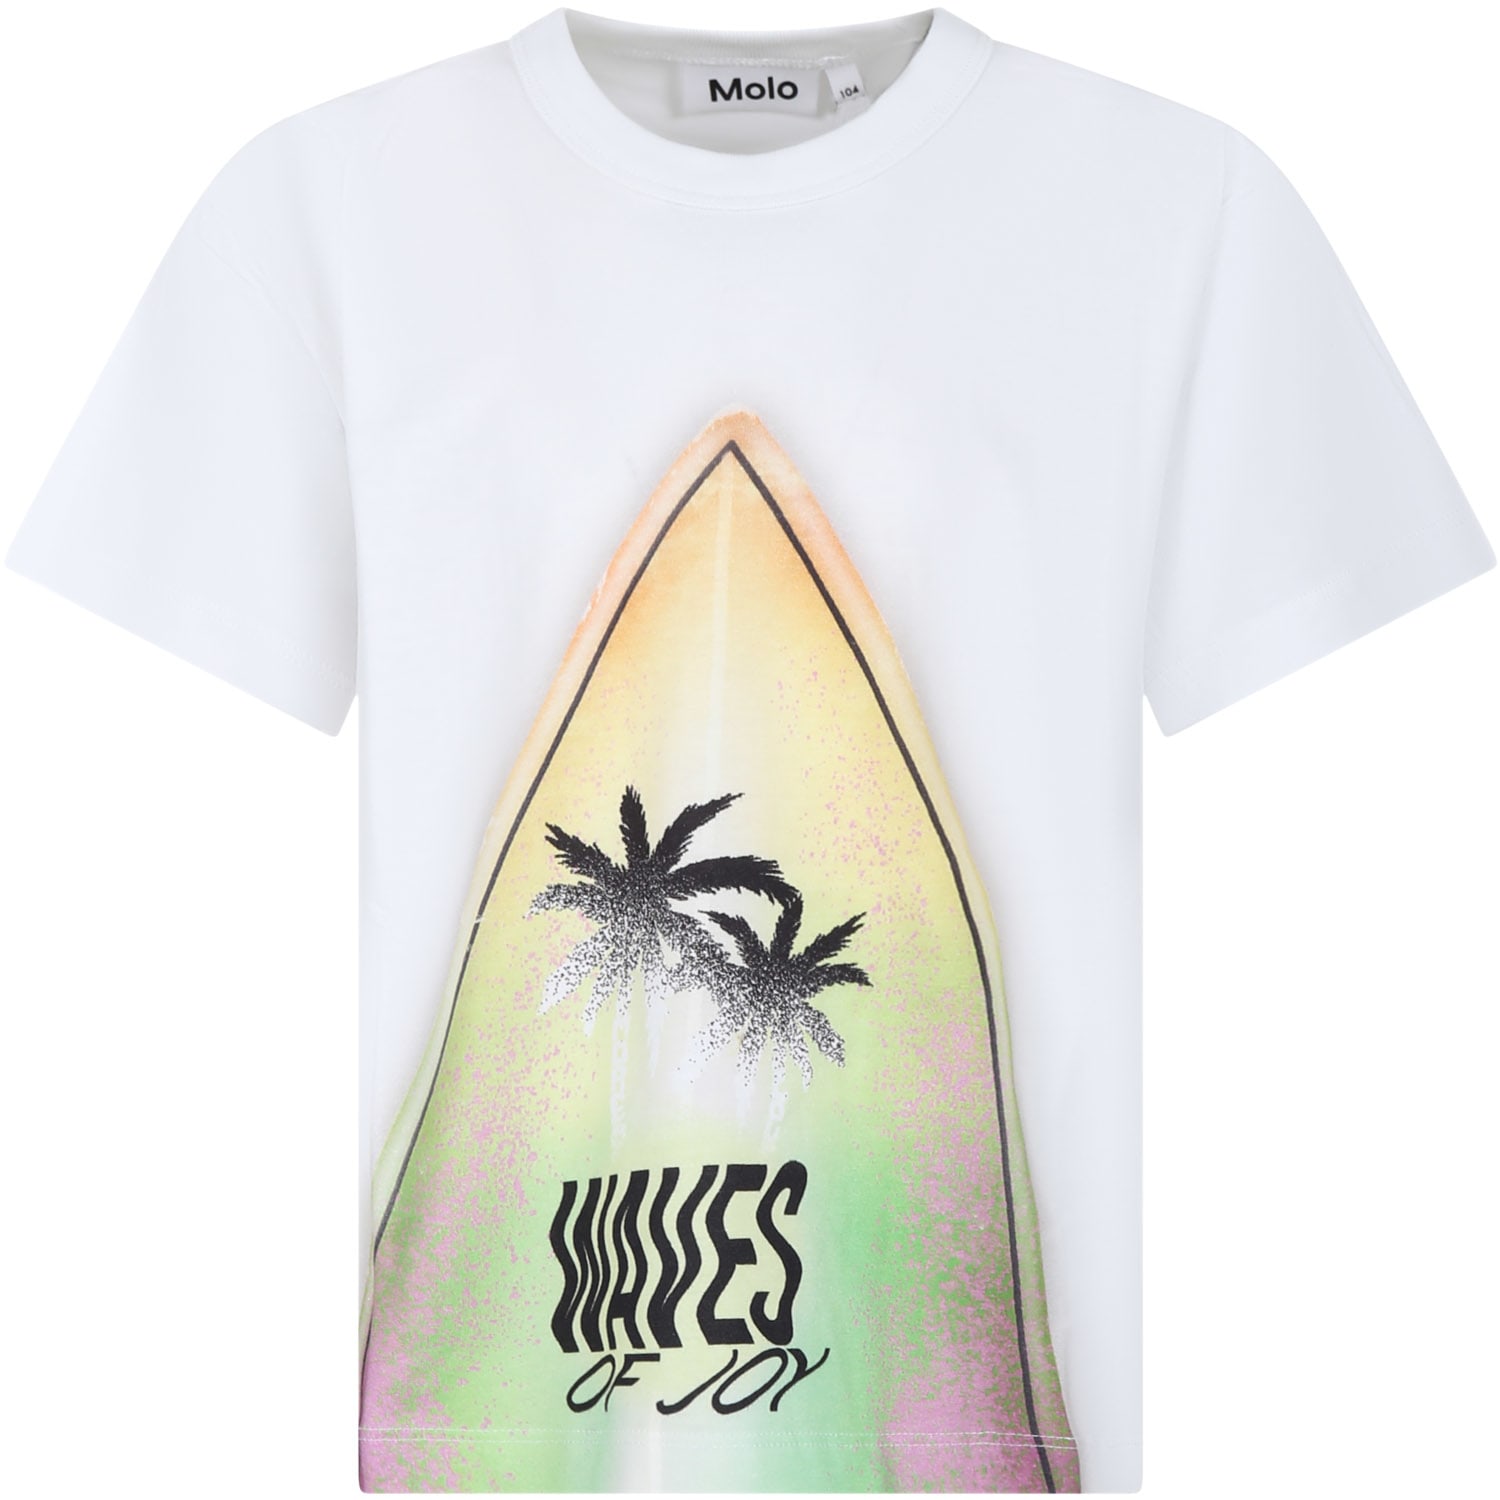 Molo Kids' White T-shirt For Boy With Surfboard Print